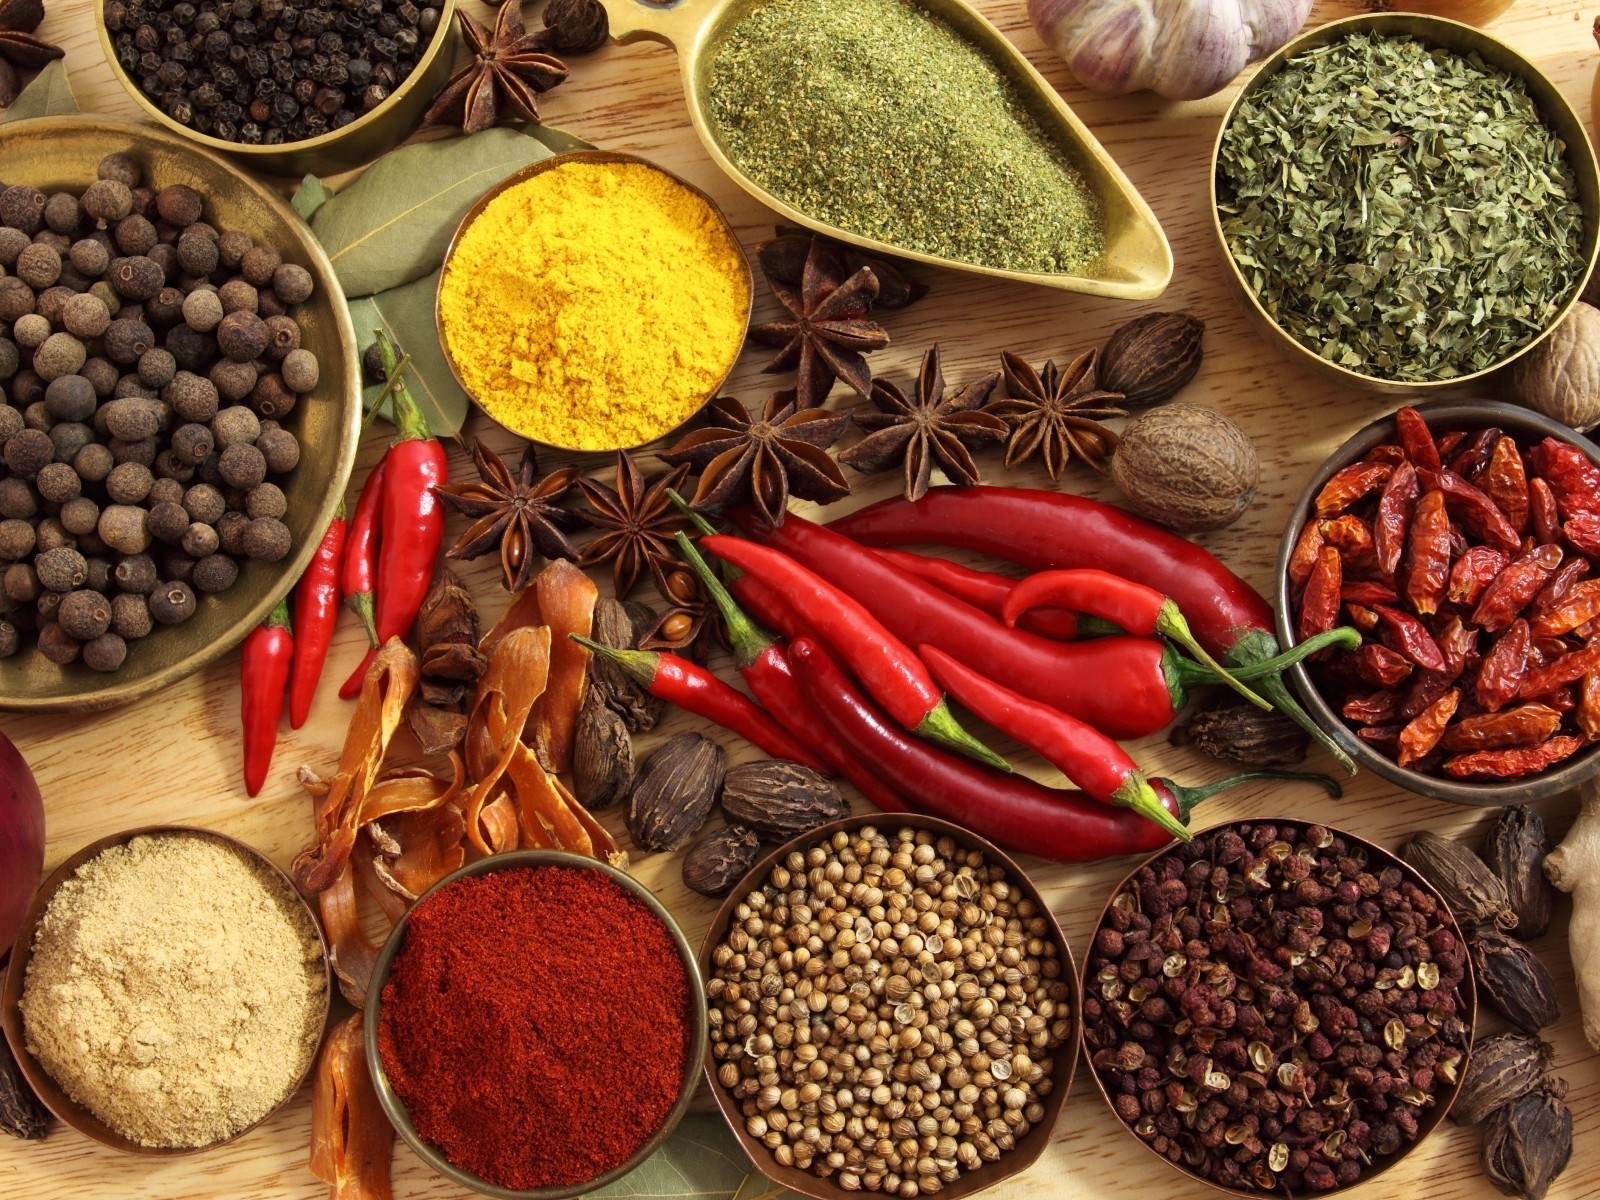 Spices Poster for 1600 x 1200 resolution